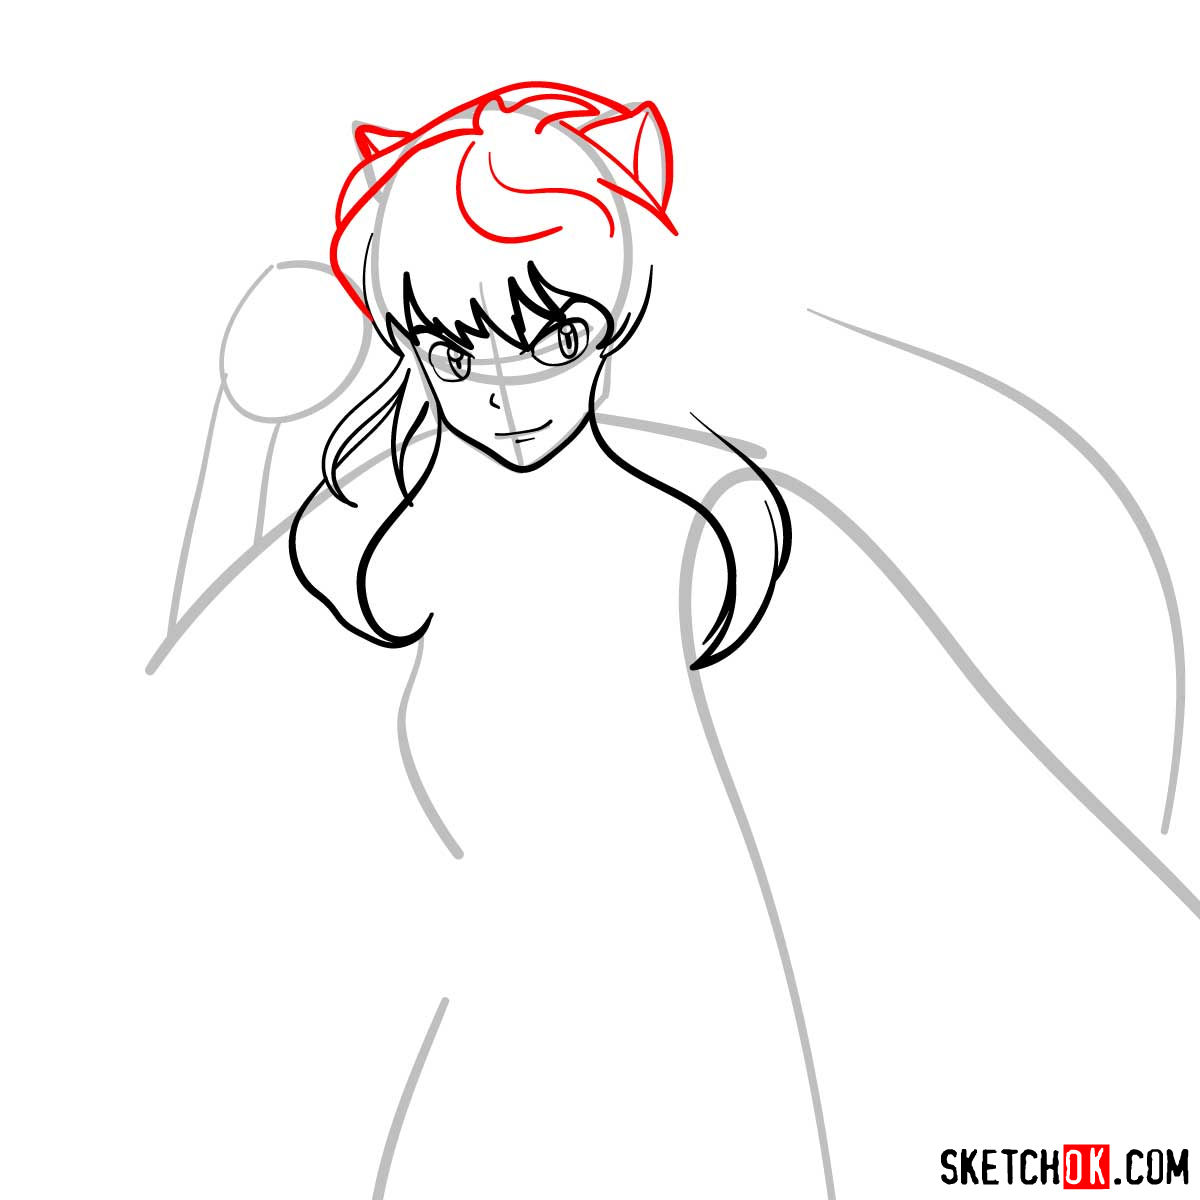 How to draw Inuyasha - 12 steps tutorial - step 06